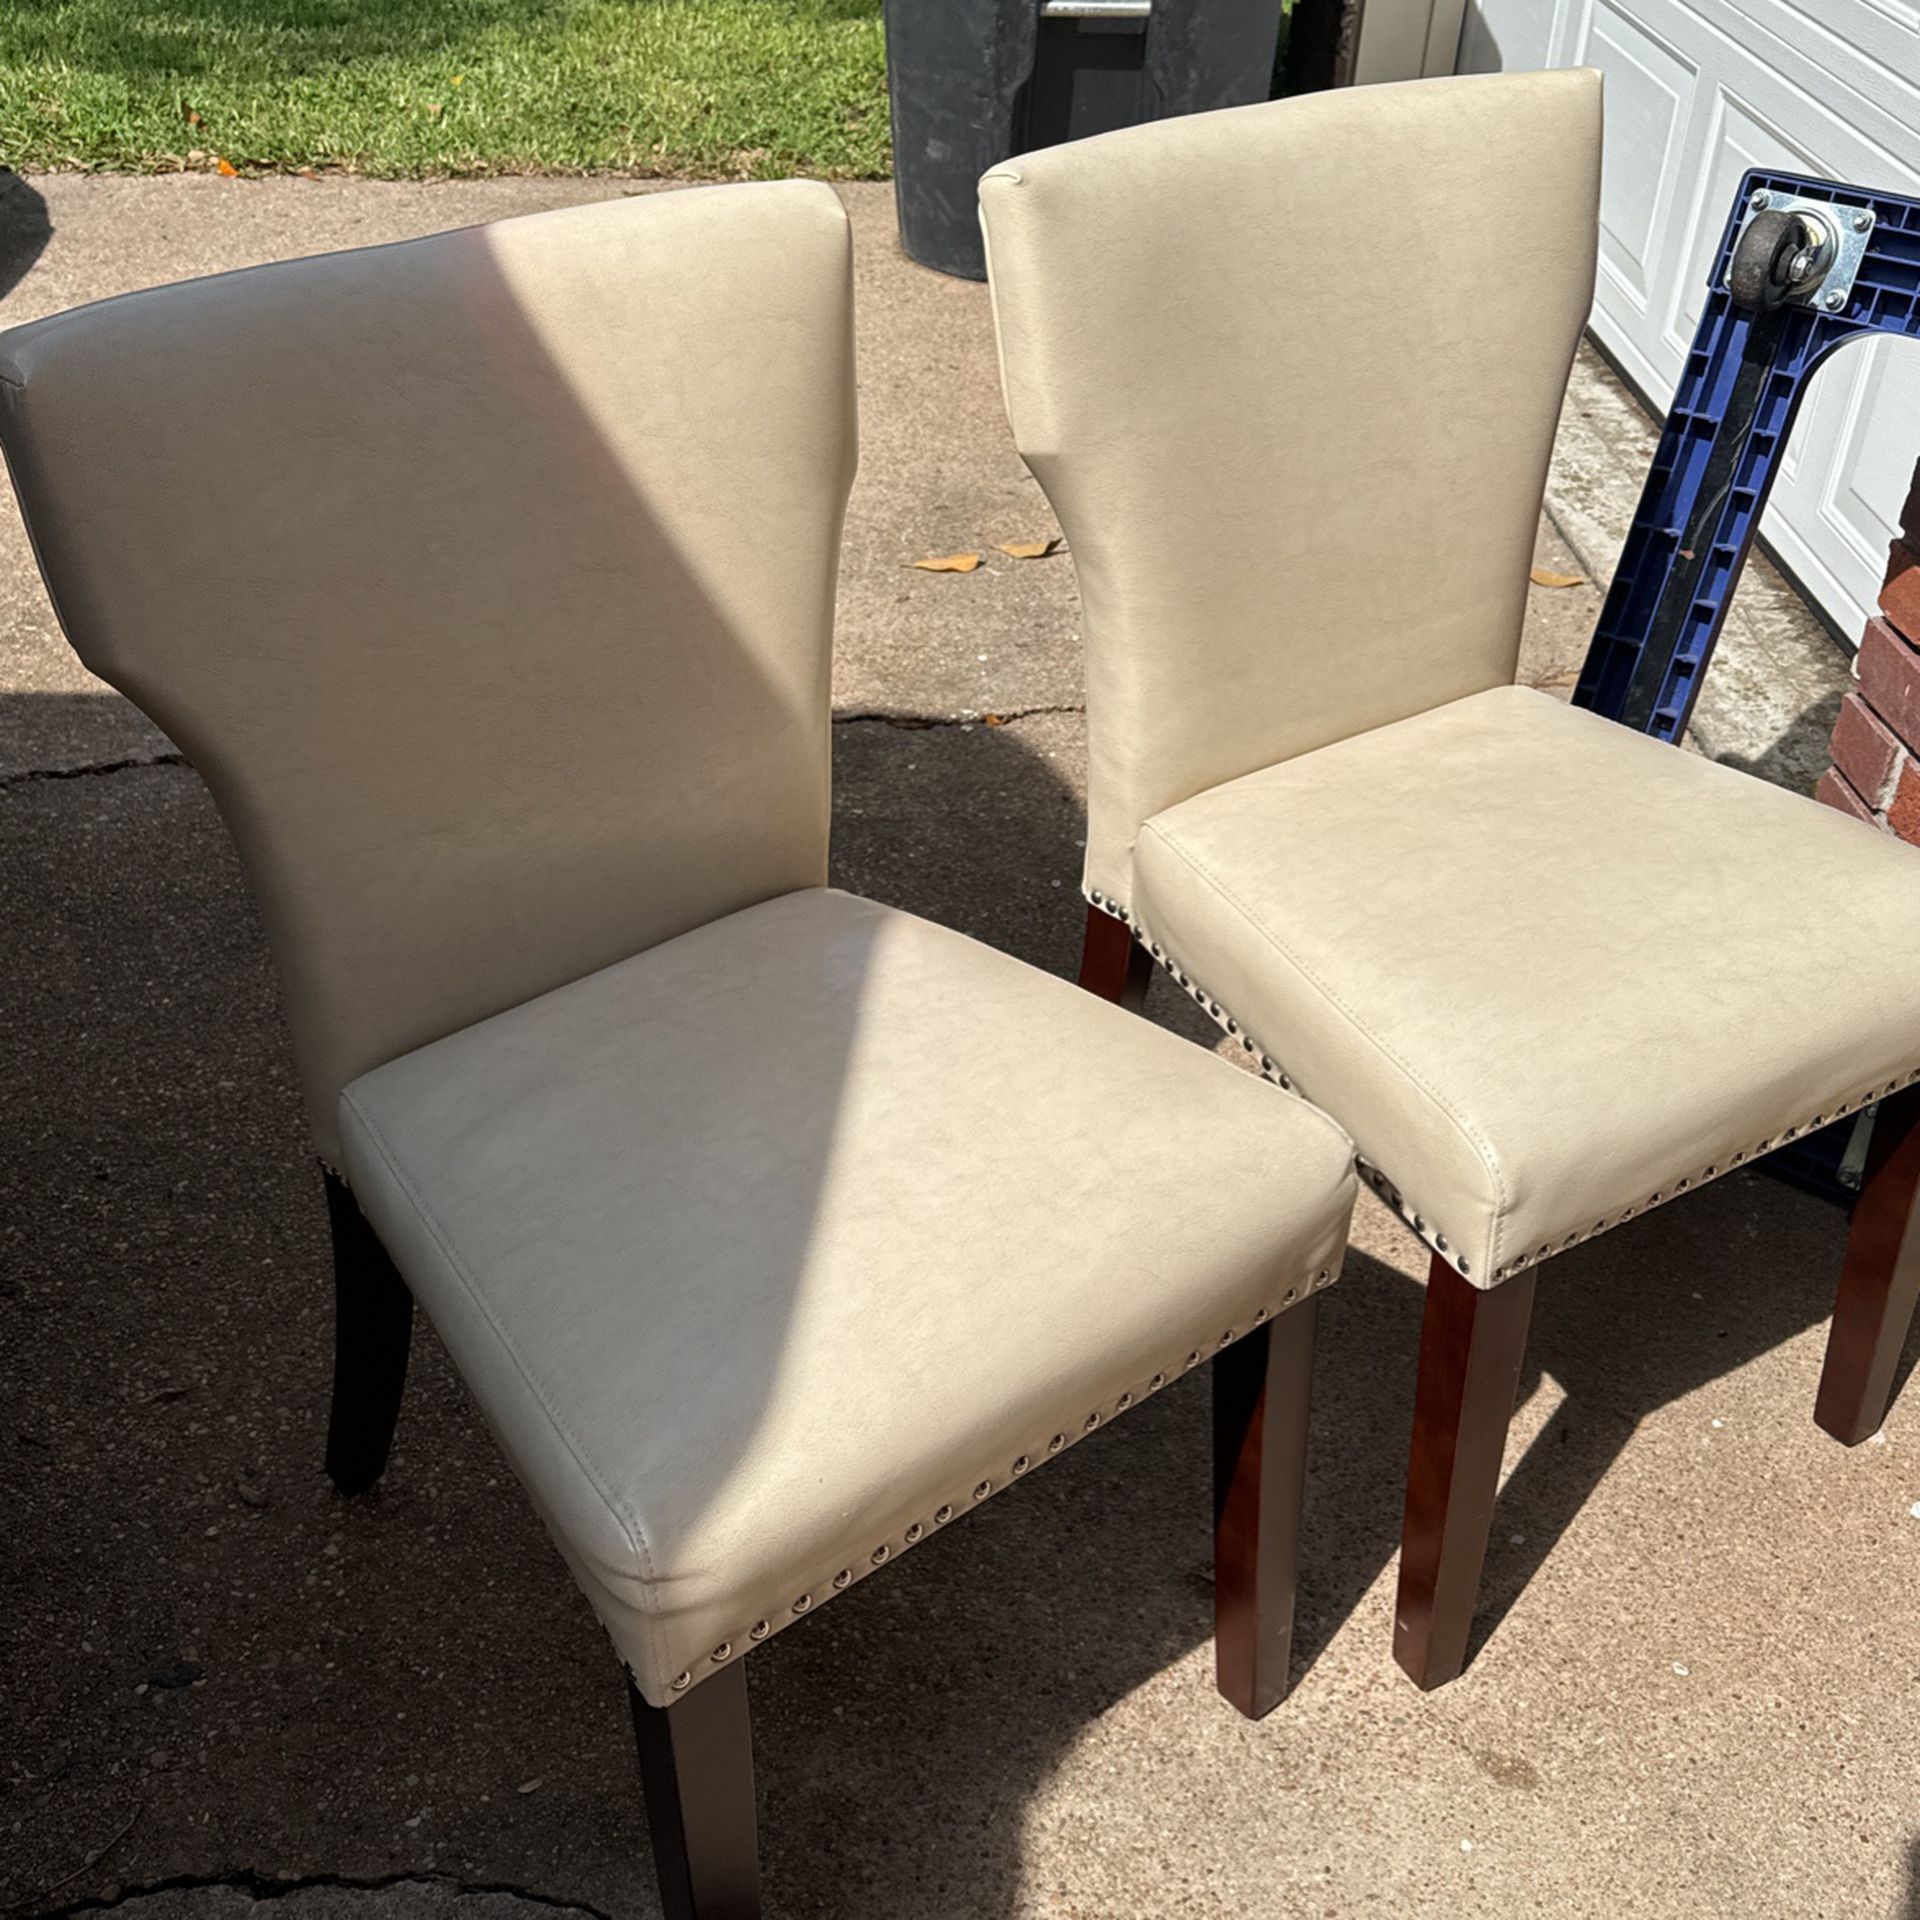 4 Beige Leather Chairs